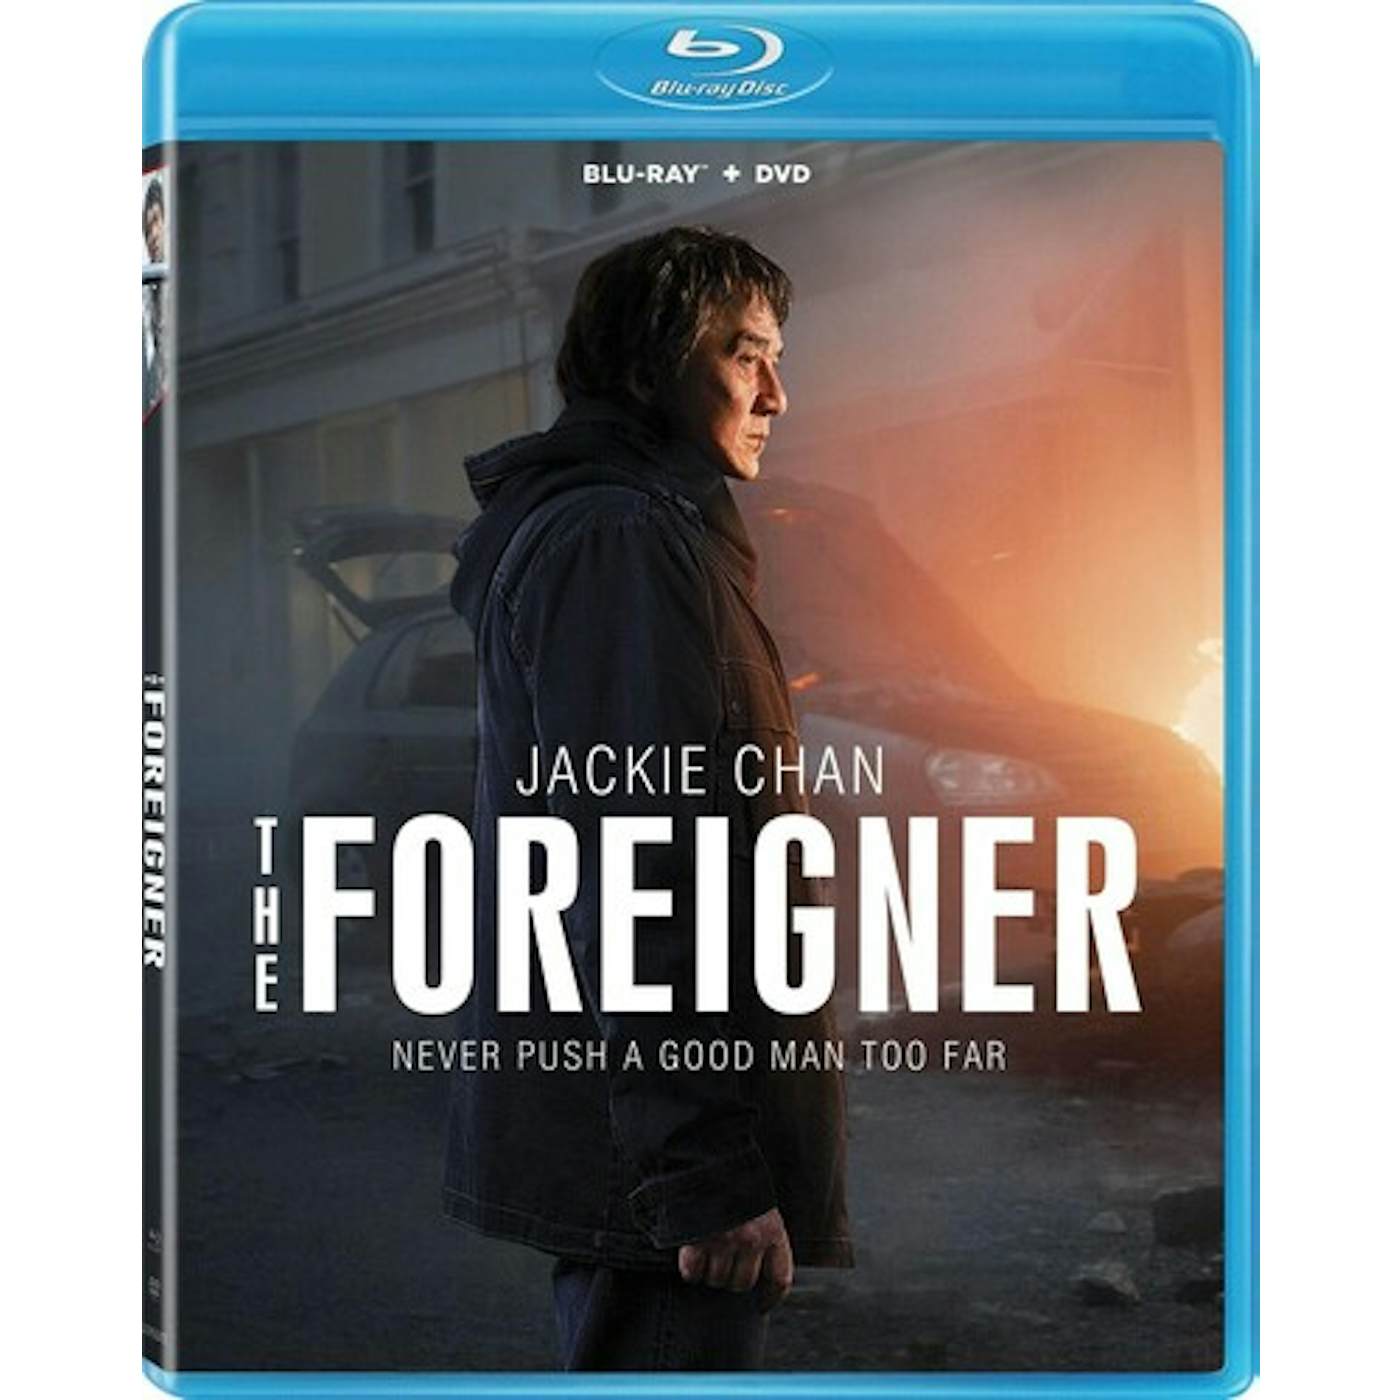 FOREIGNER Blu-ray